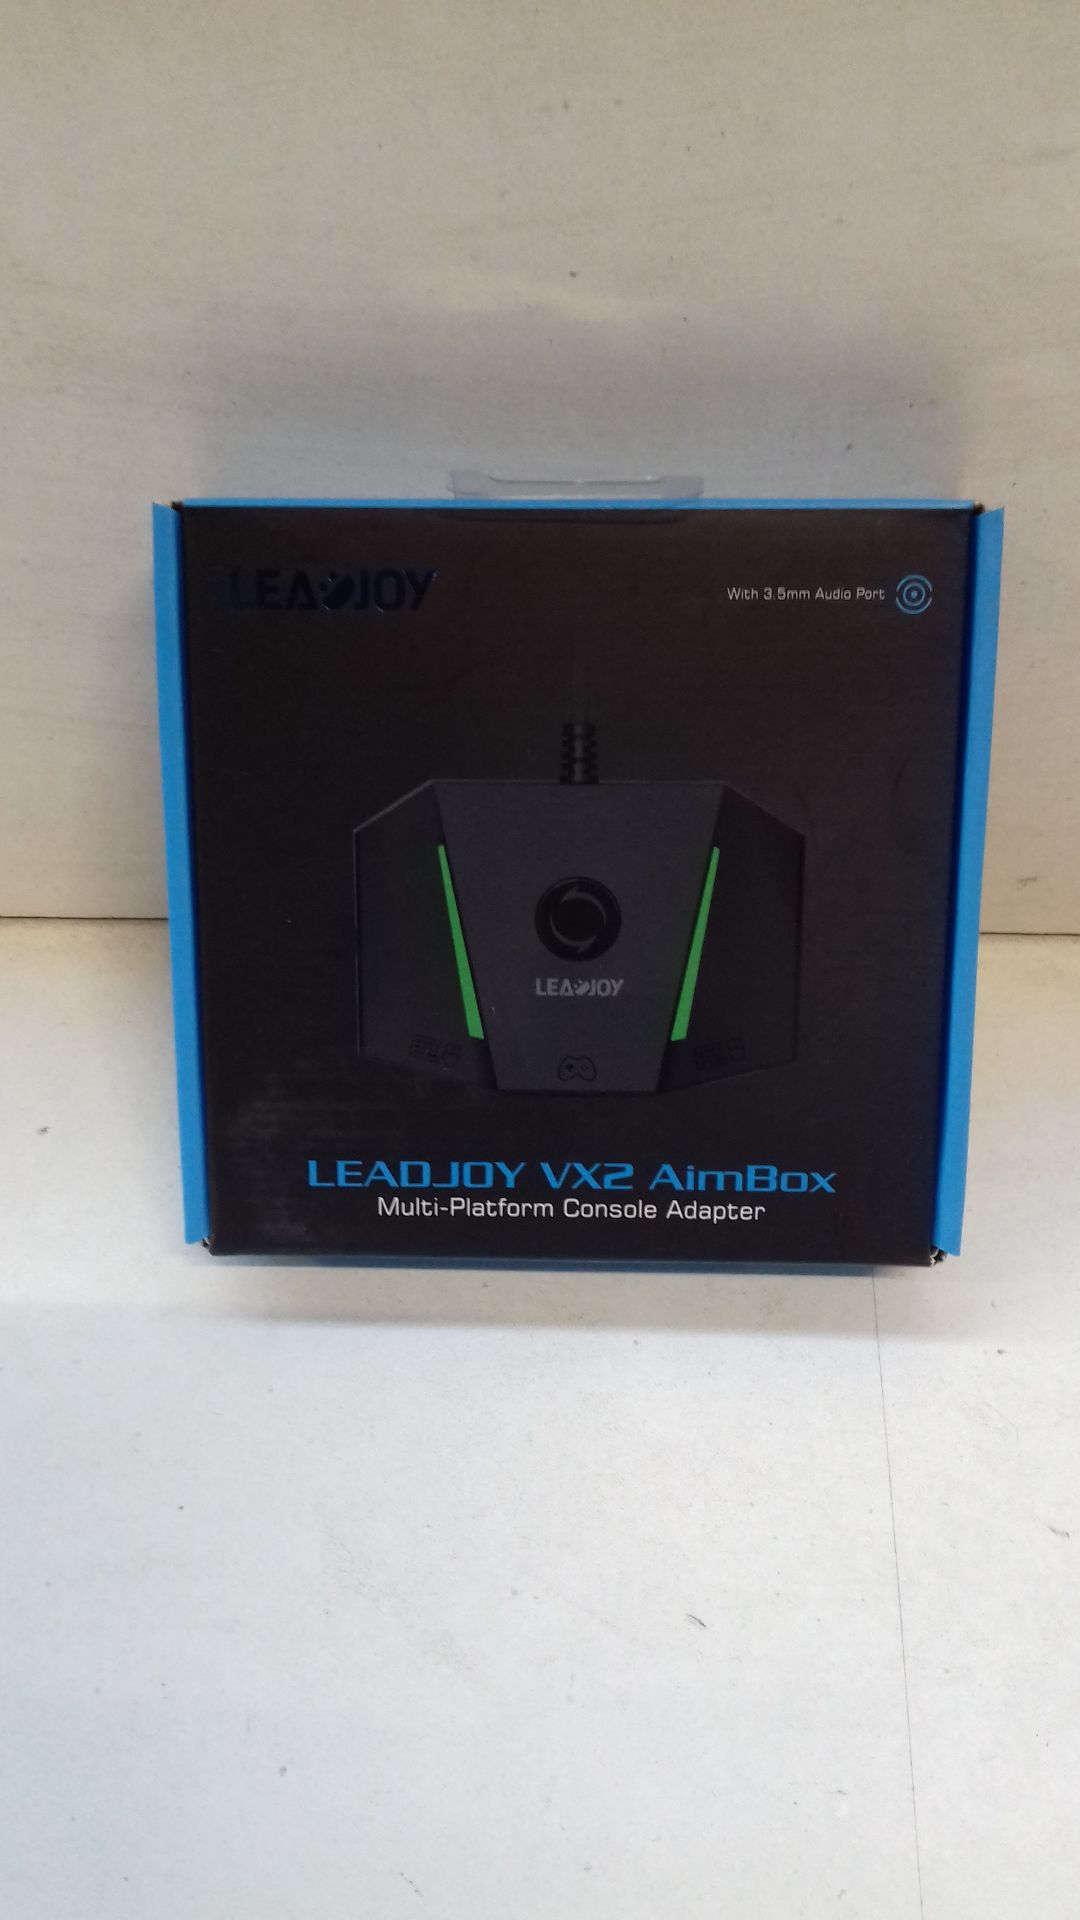 RRP £54.38 LeadJoy VX2 AimBox Keyboard and Mouse Adapter - Image 2 of 2